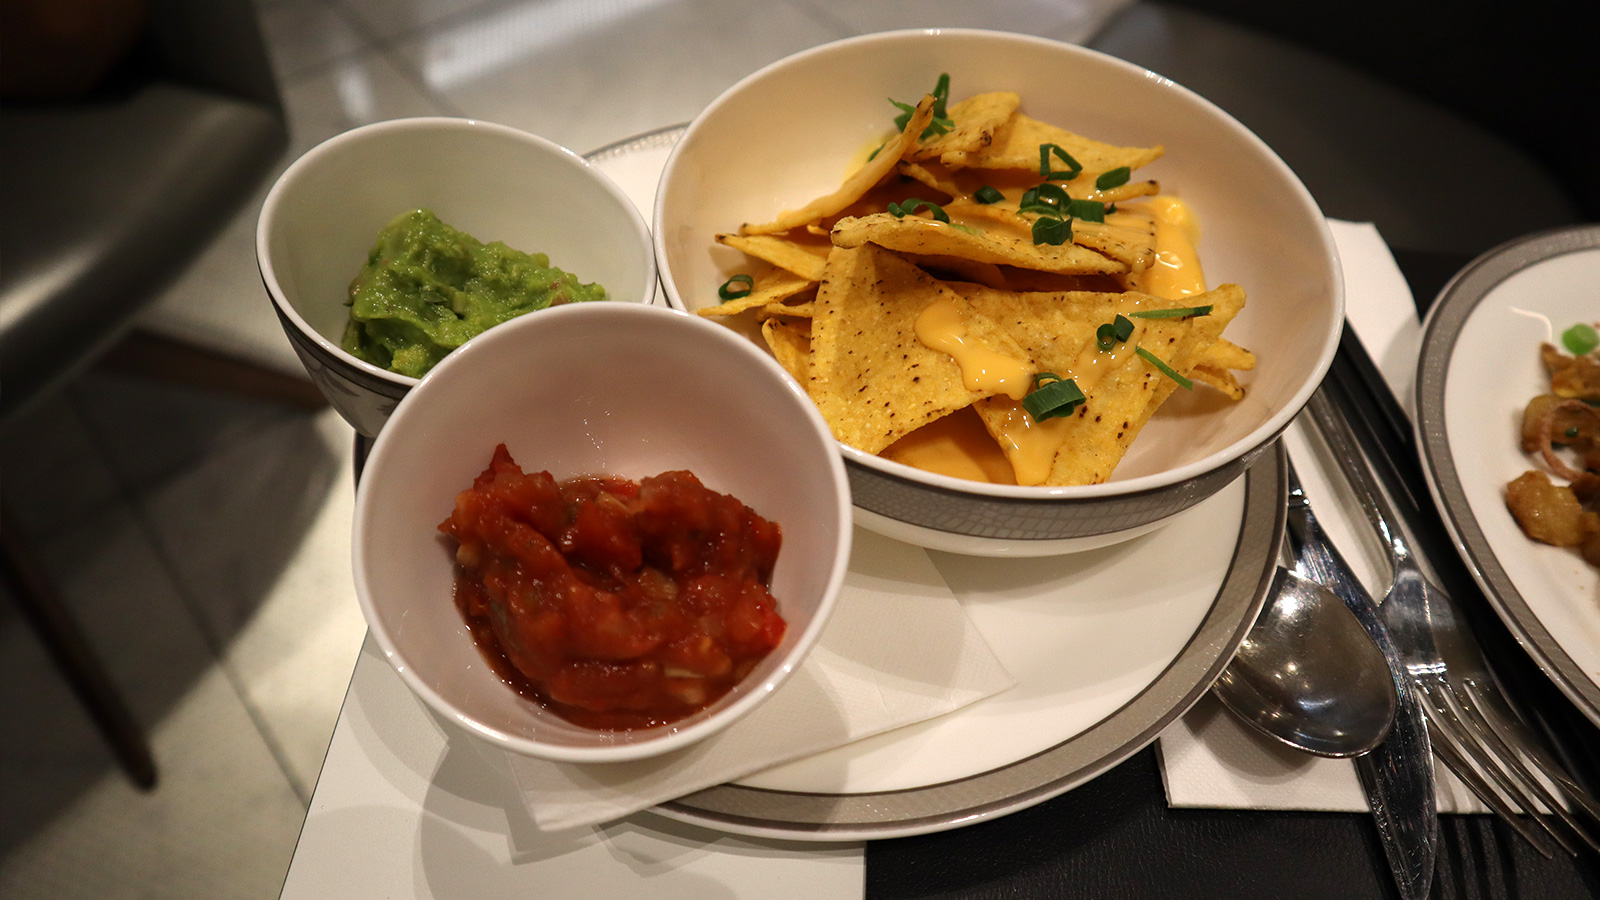 Cheesy nachos in the Singapore Airlines SilverKris First Class Lounge in Melbourne